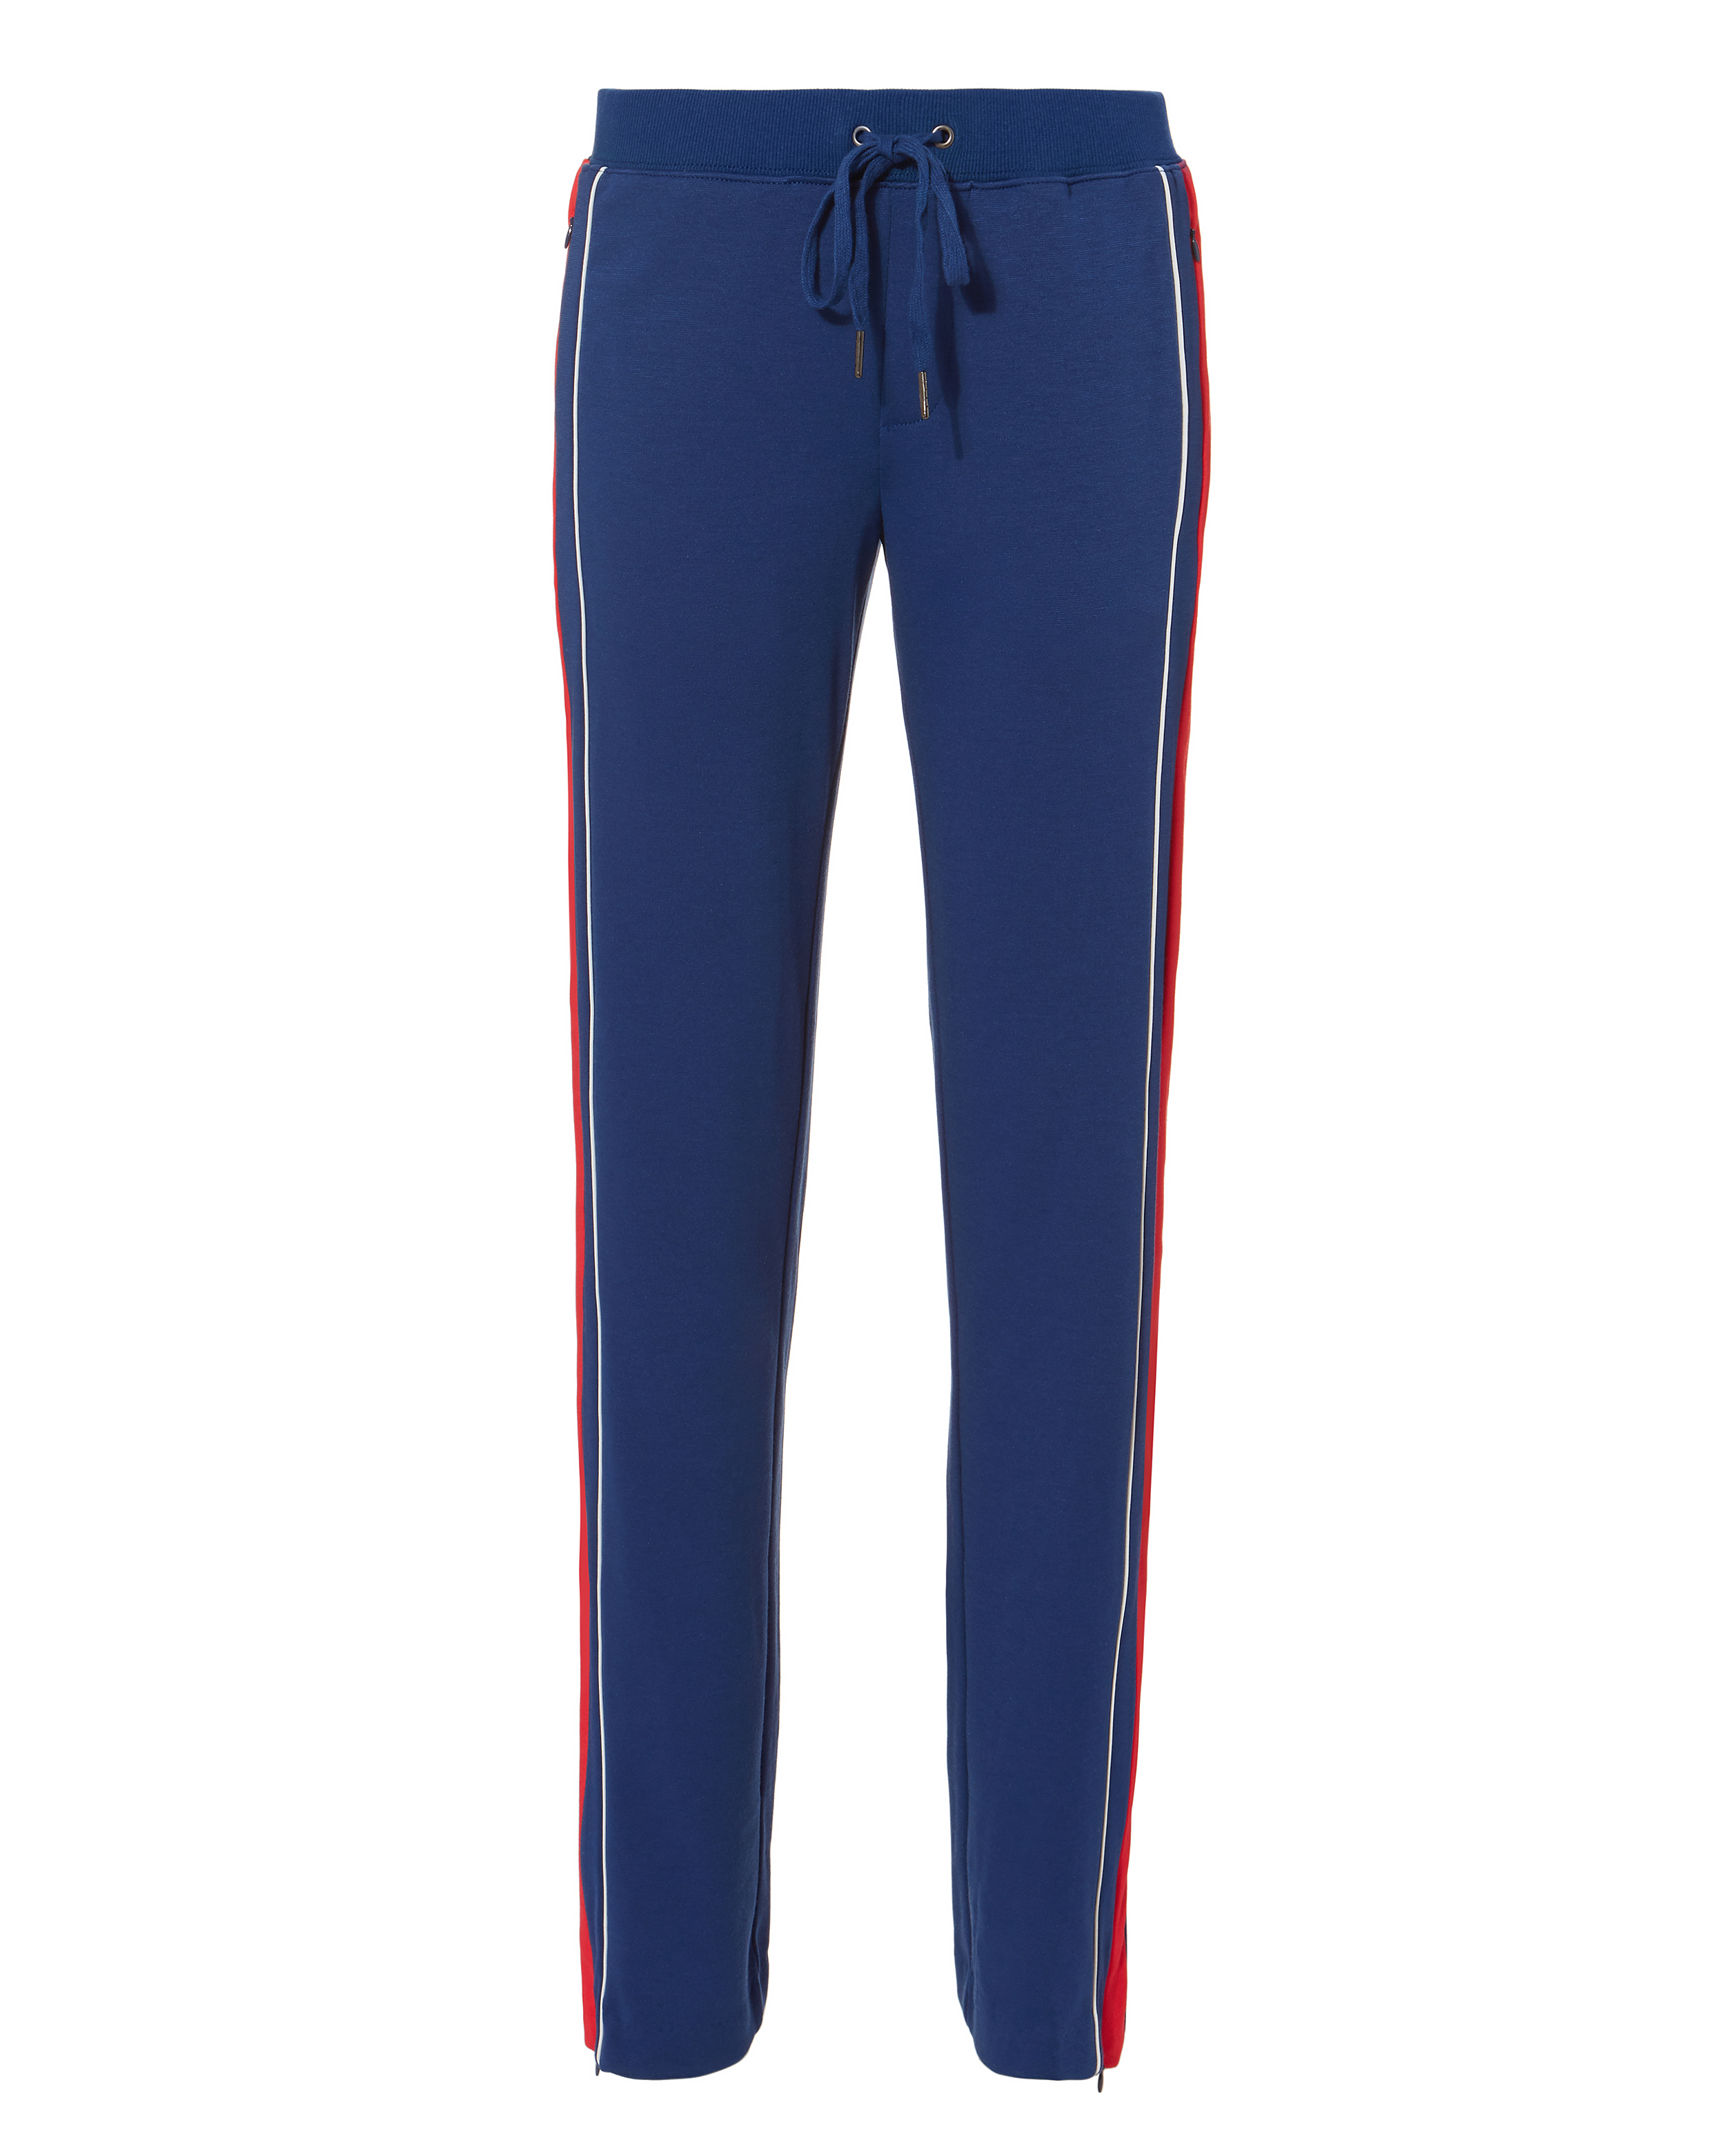 PAM AND GELA Colorblocked Track Pants,TM4956SPRPANT